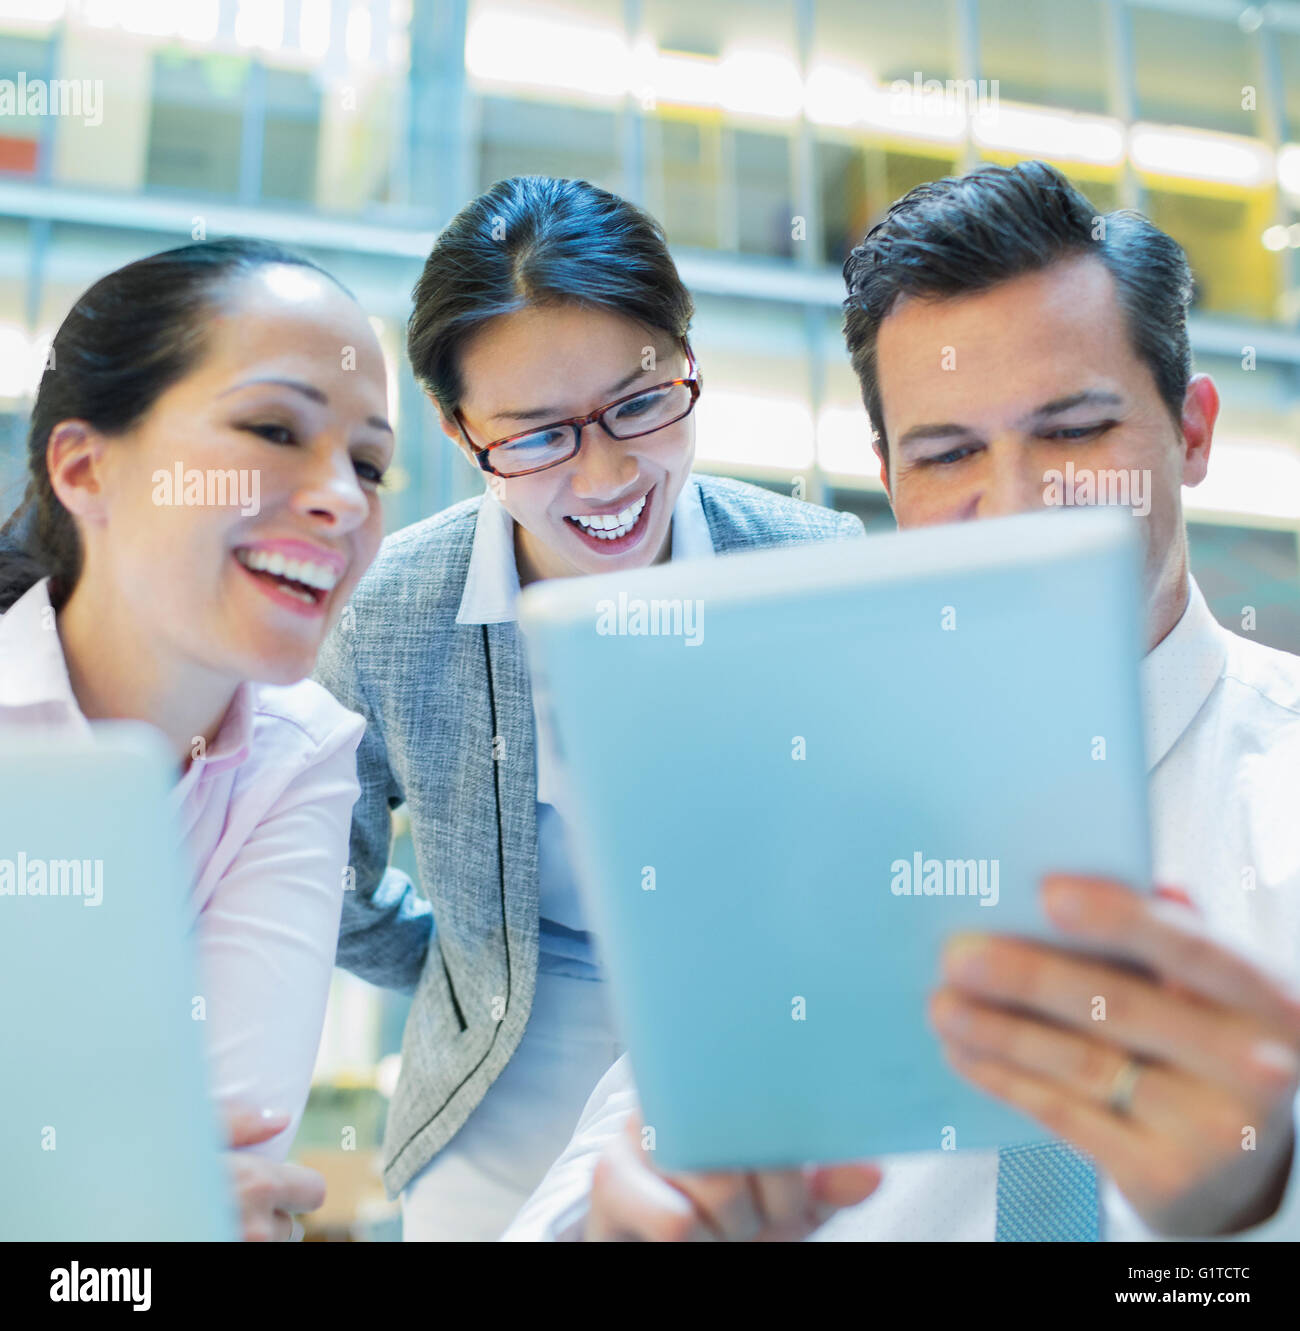 Smiling business people using digital tablet in office Stock Photo